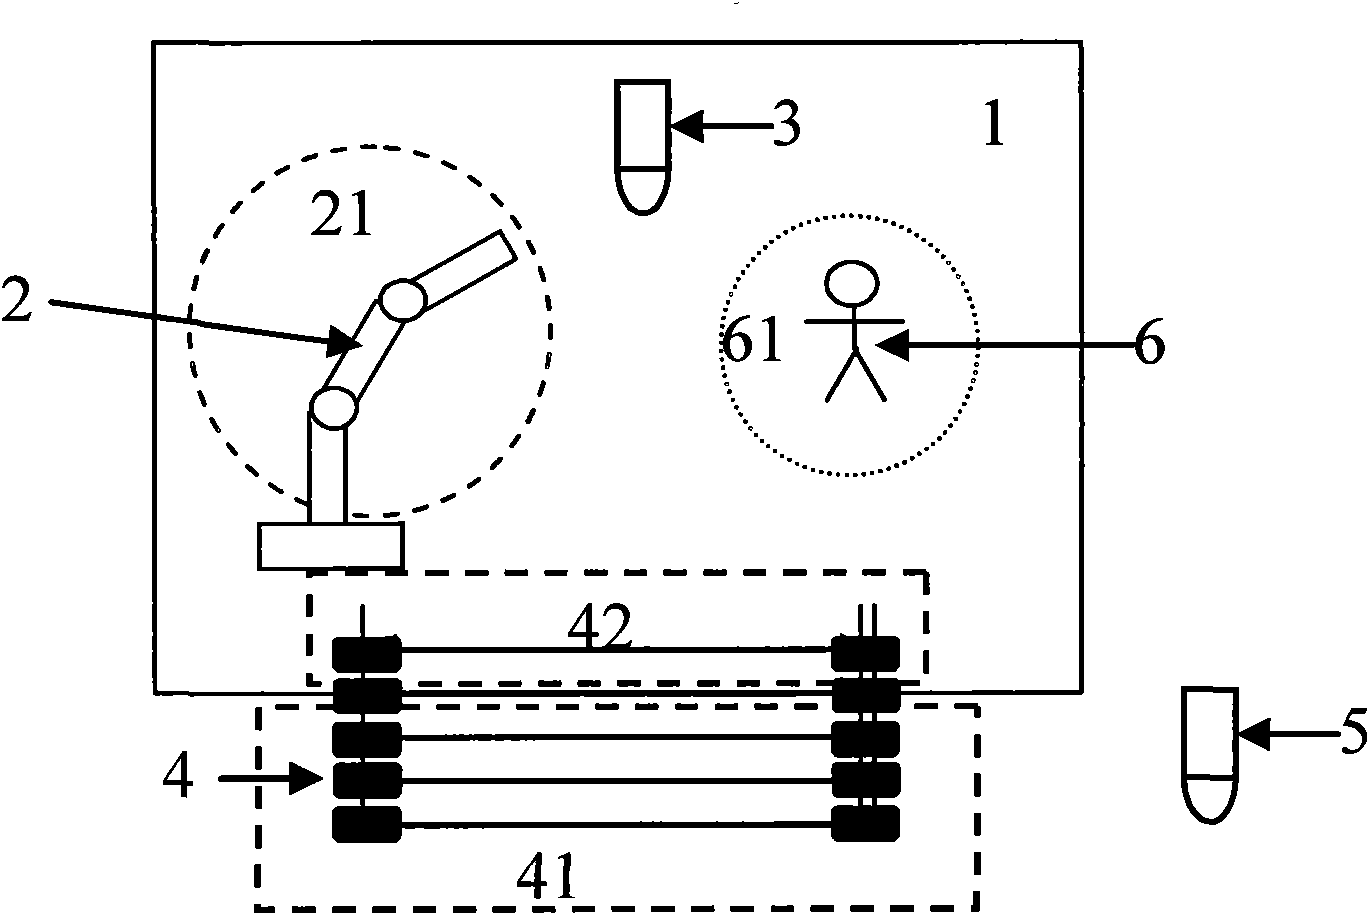 Method for preventing industrial robot from colliding with worker